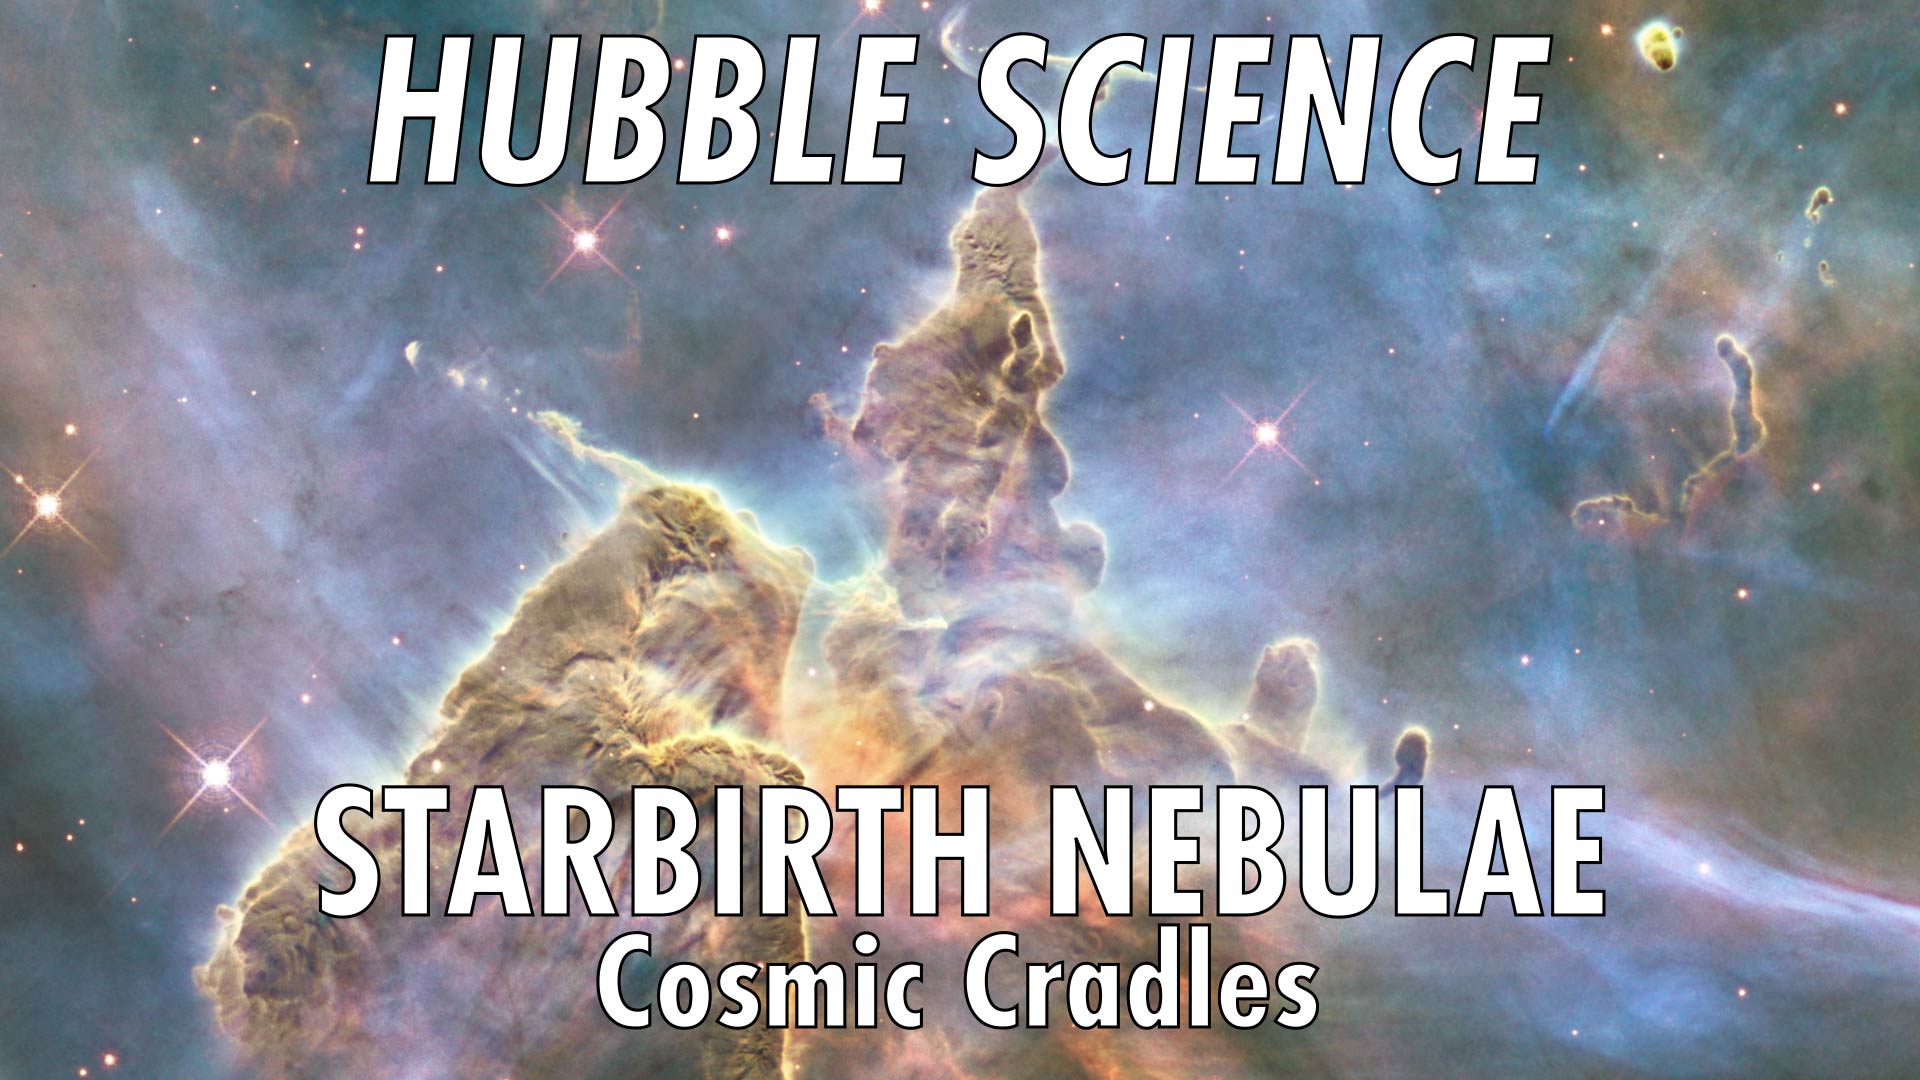 Preview Image for Hubble Science: Starbirth Nebulae, Cosmic Cradles